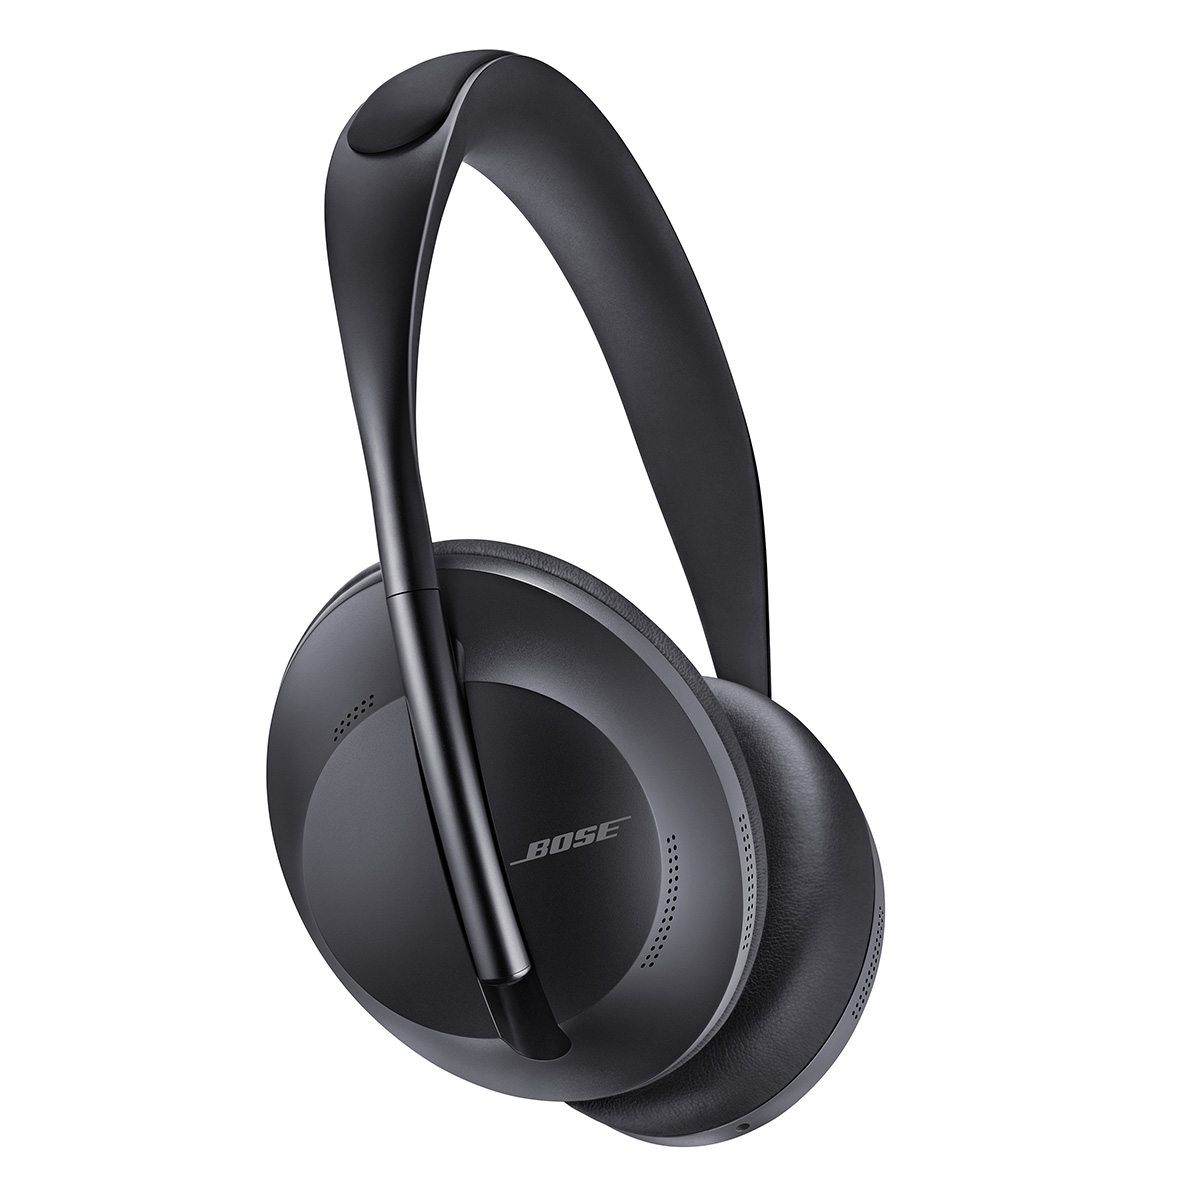 Bose Introduces Wireless Noise Cancelling Headphone 700 with Voice